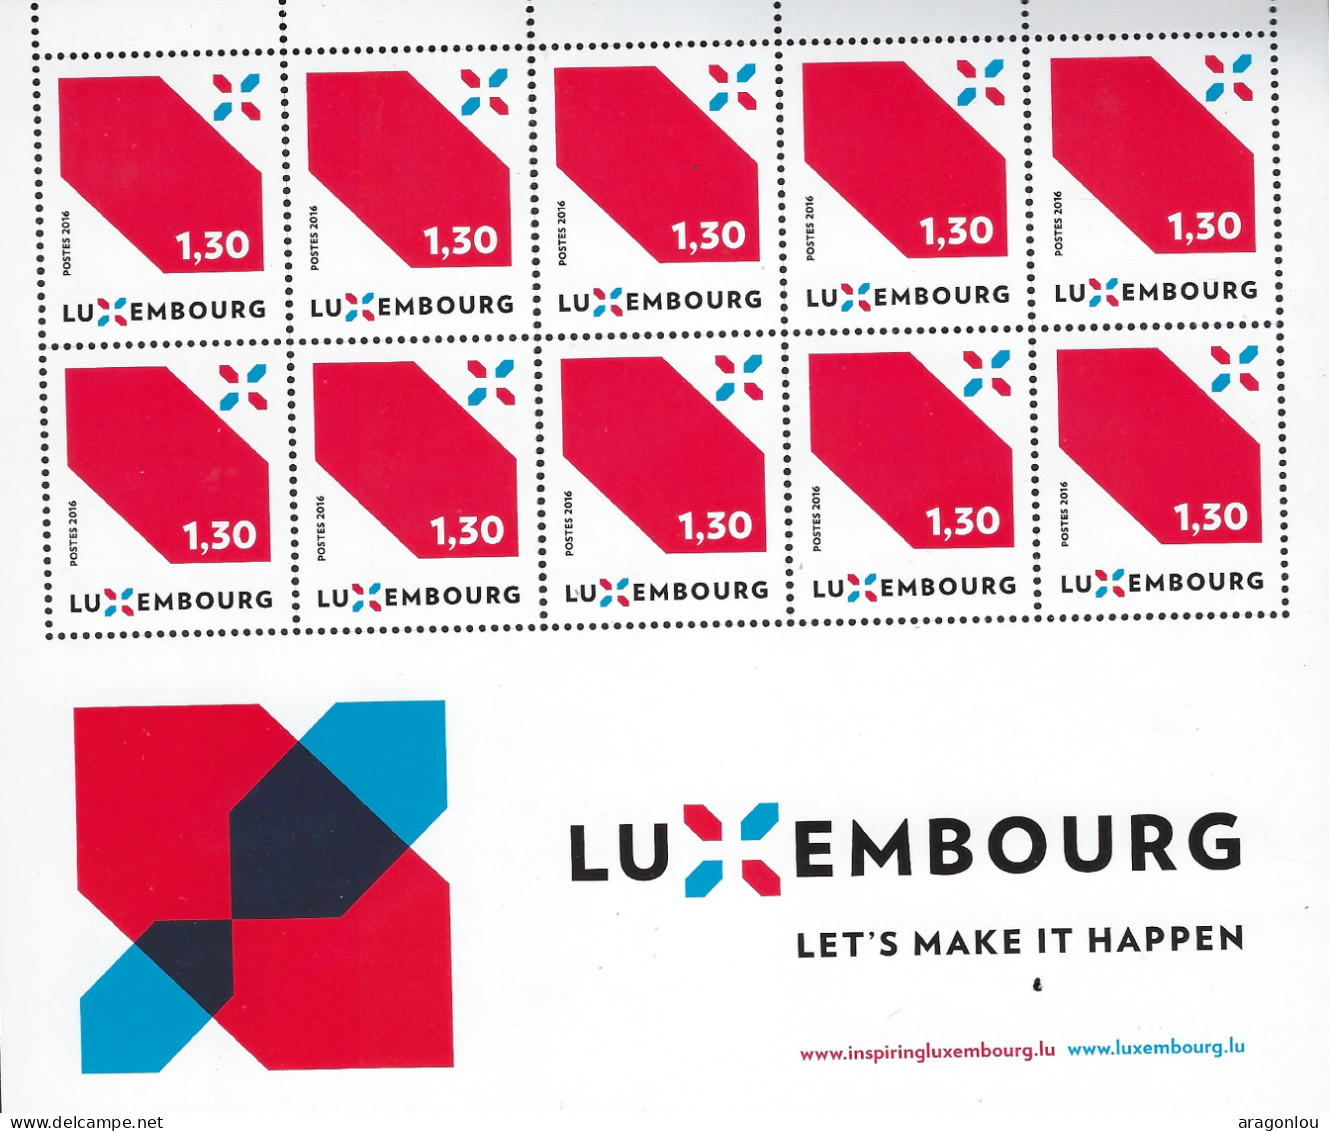 Luxembourg - Luxemburg - Timbres - Feuillet  à  10 Timbres X  1,30 -  2016  LUXEMBOURG  LET'S MAKE IT HAPPEN  MNH** - Blocs & Feuillets